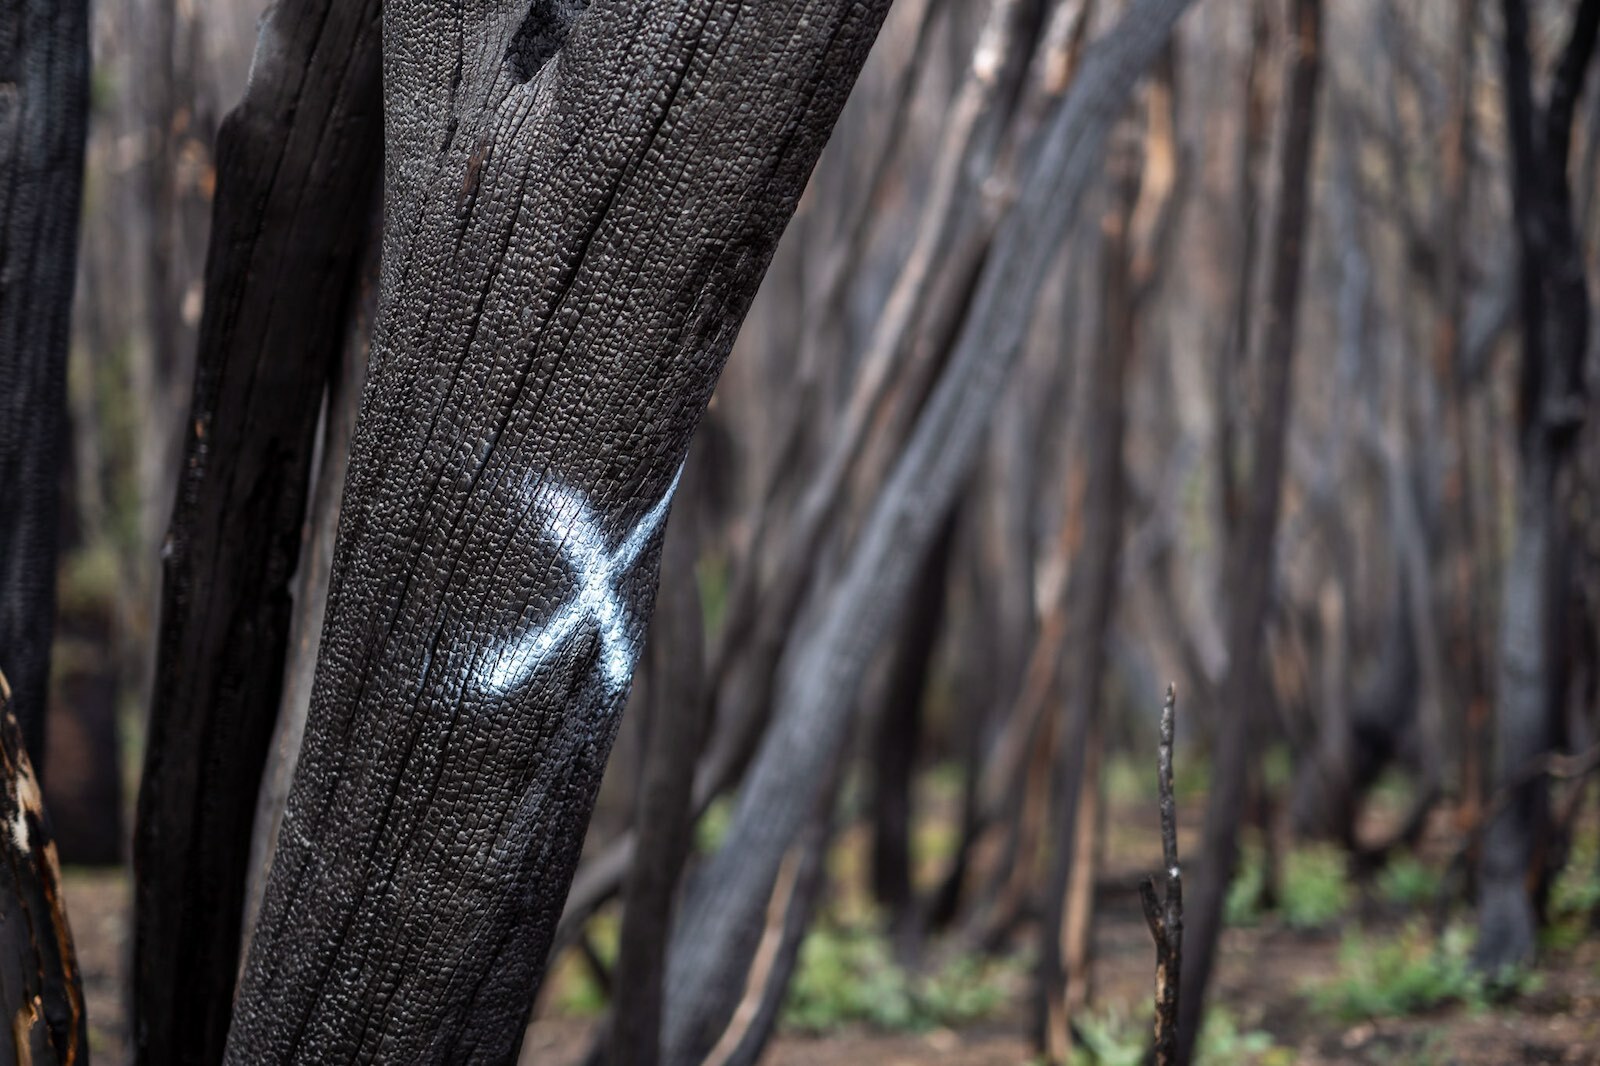 burnt trees in Kosciuszko National Park after the fires, taken during a bikepacking trip